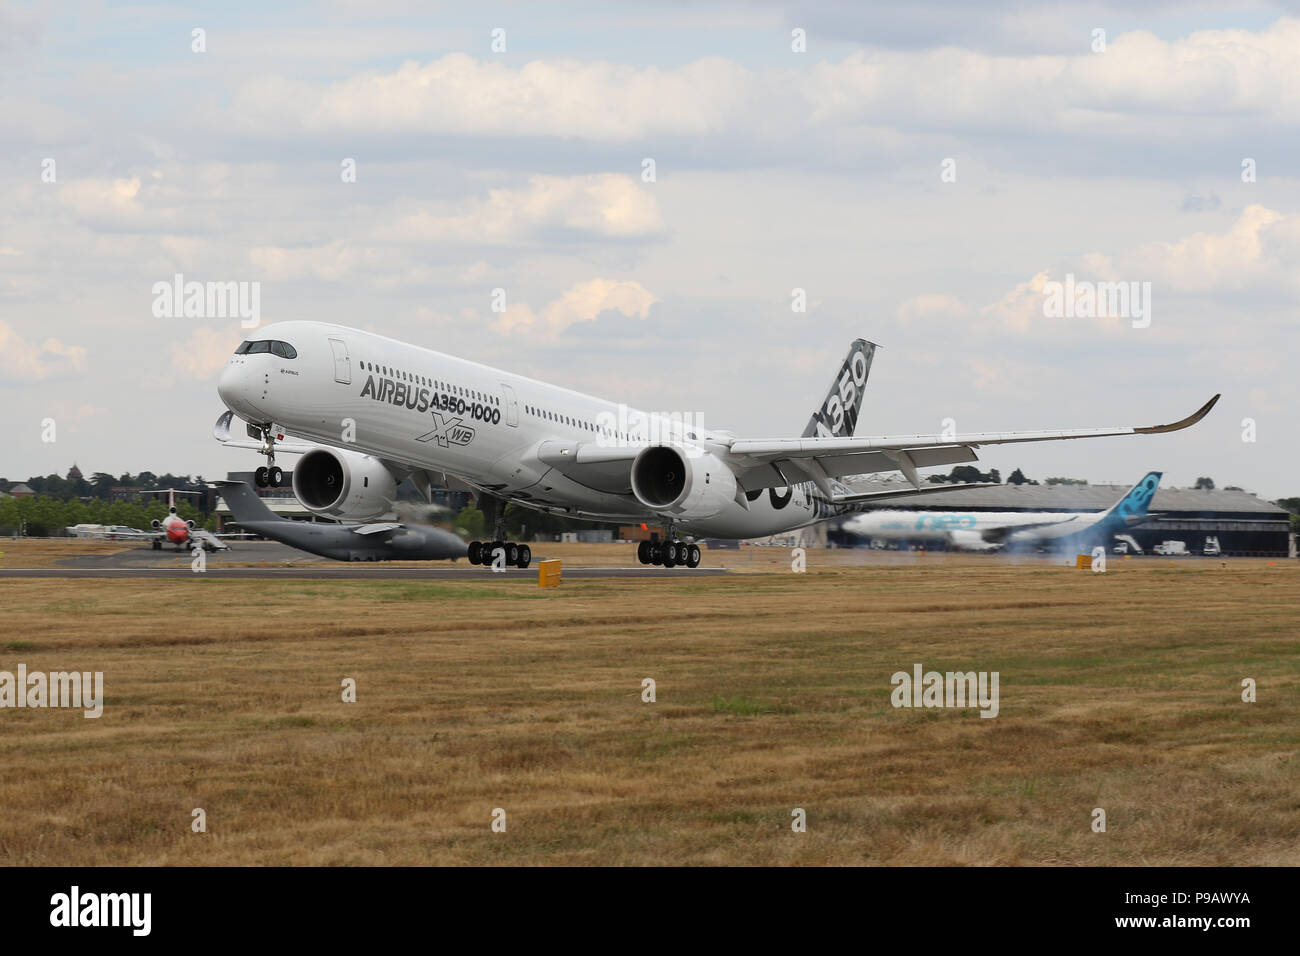 Farnborough, UK. 16th July 2018. An Airbus A350-100 XWB lands after performing its display on the opening day of the 2018 Farnborough International Airshow, one of the biggest aviation trade and industry events in the world, held in the UK. Credit: James Hancock/Alamy Live News Stock Photo